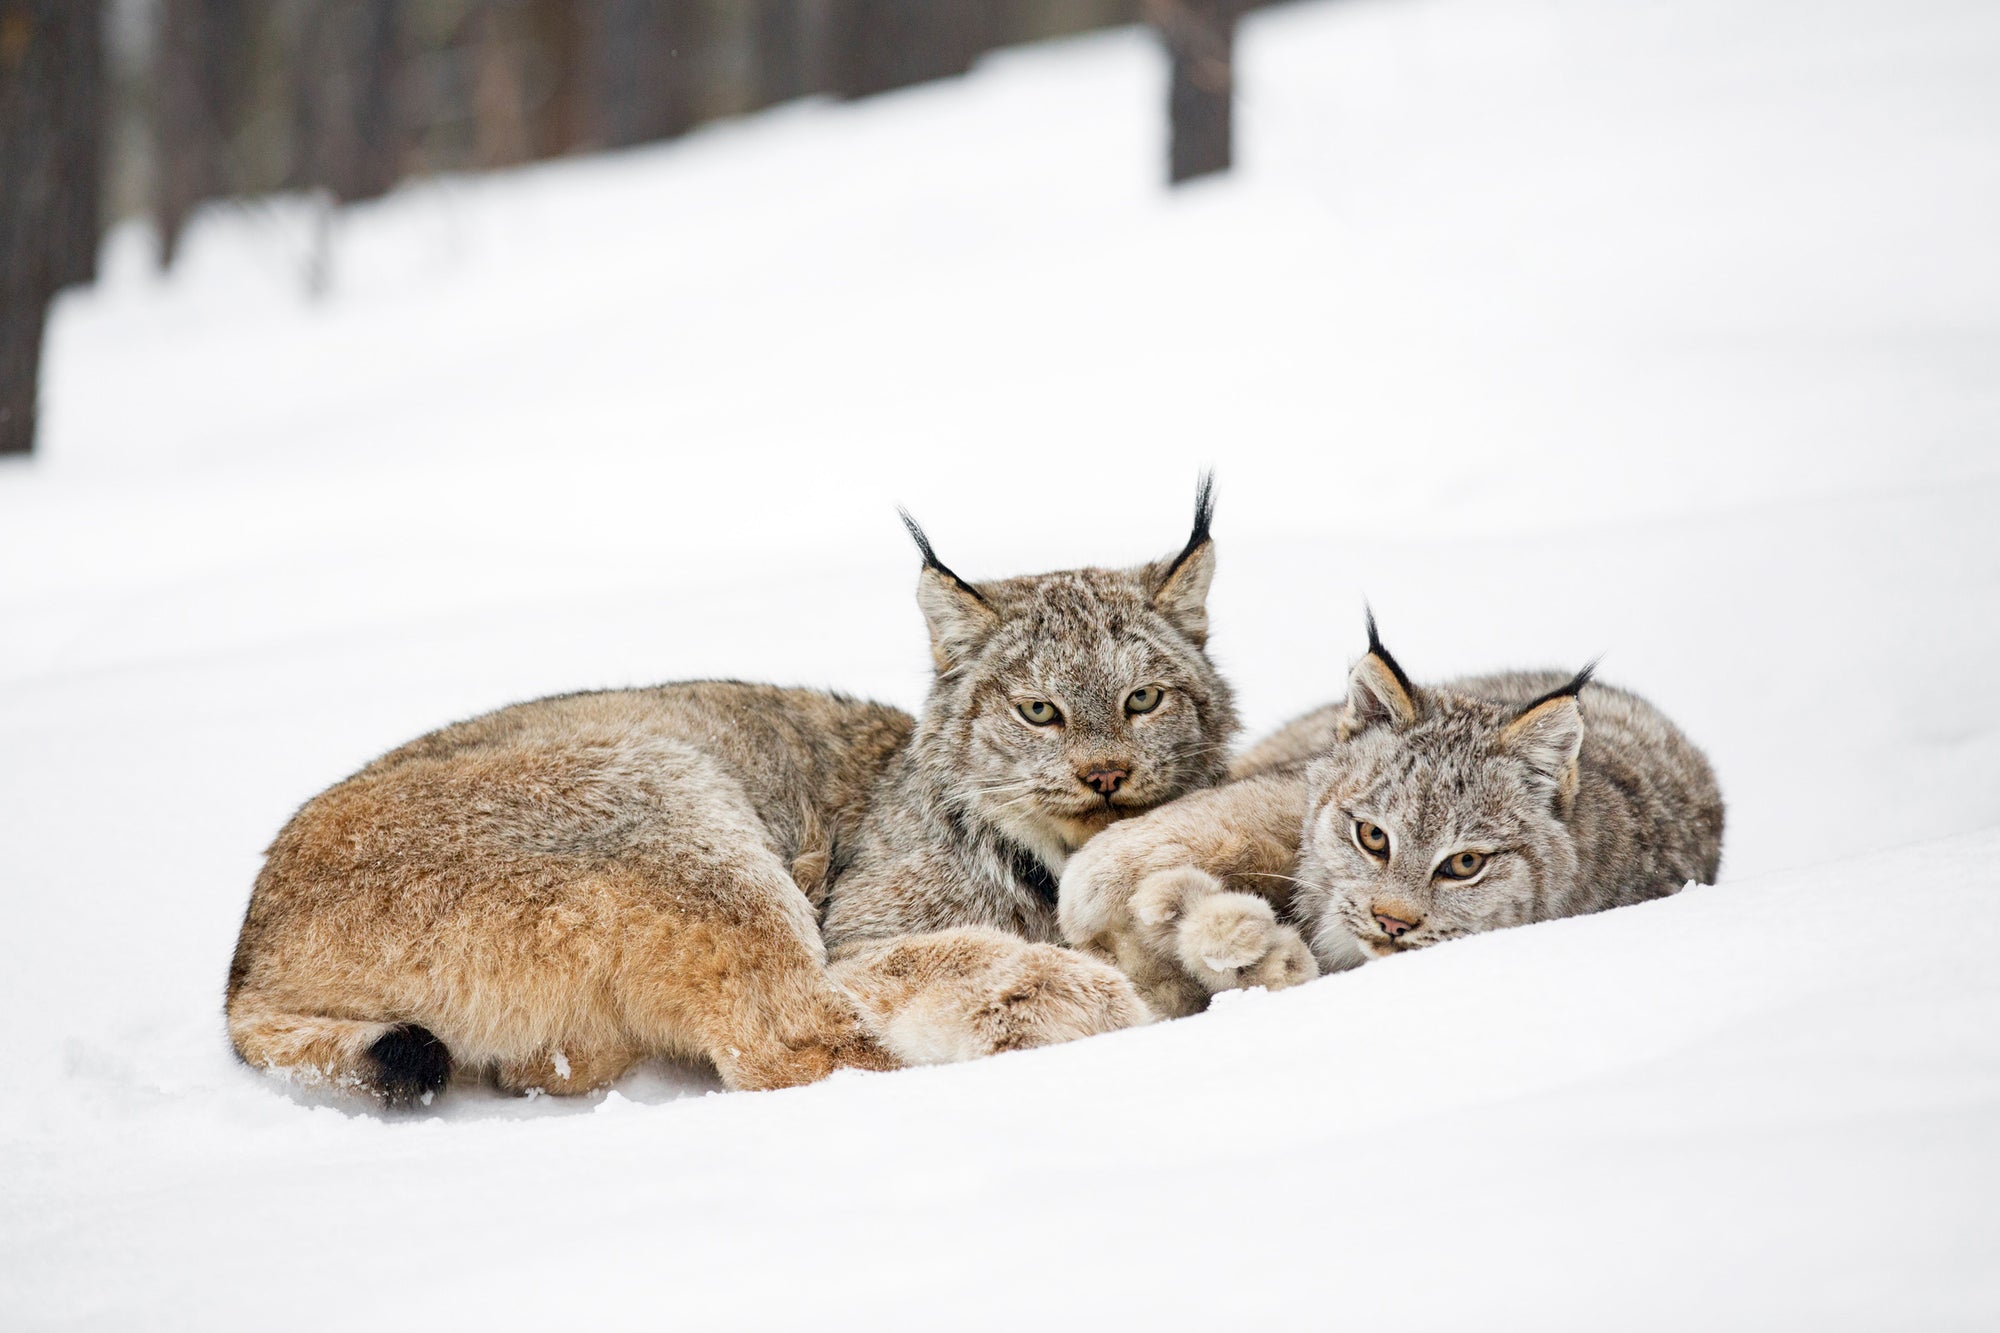 Two Canada lynx sitting on a snowbank. End of image description.